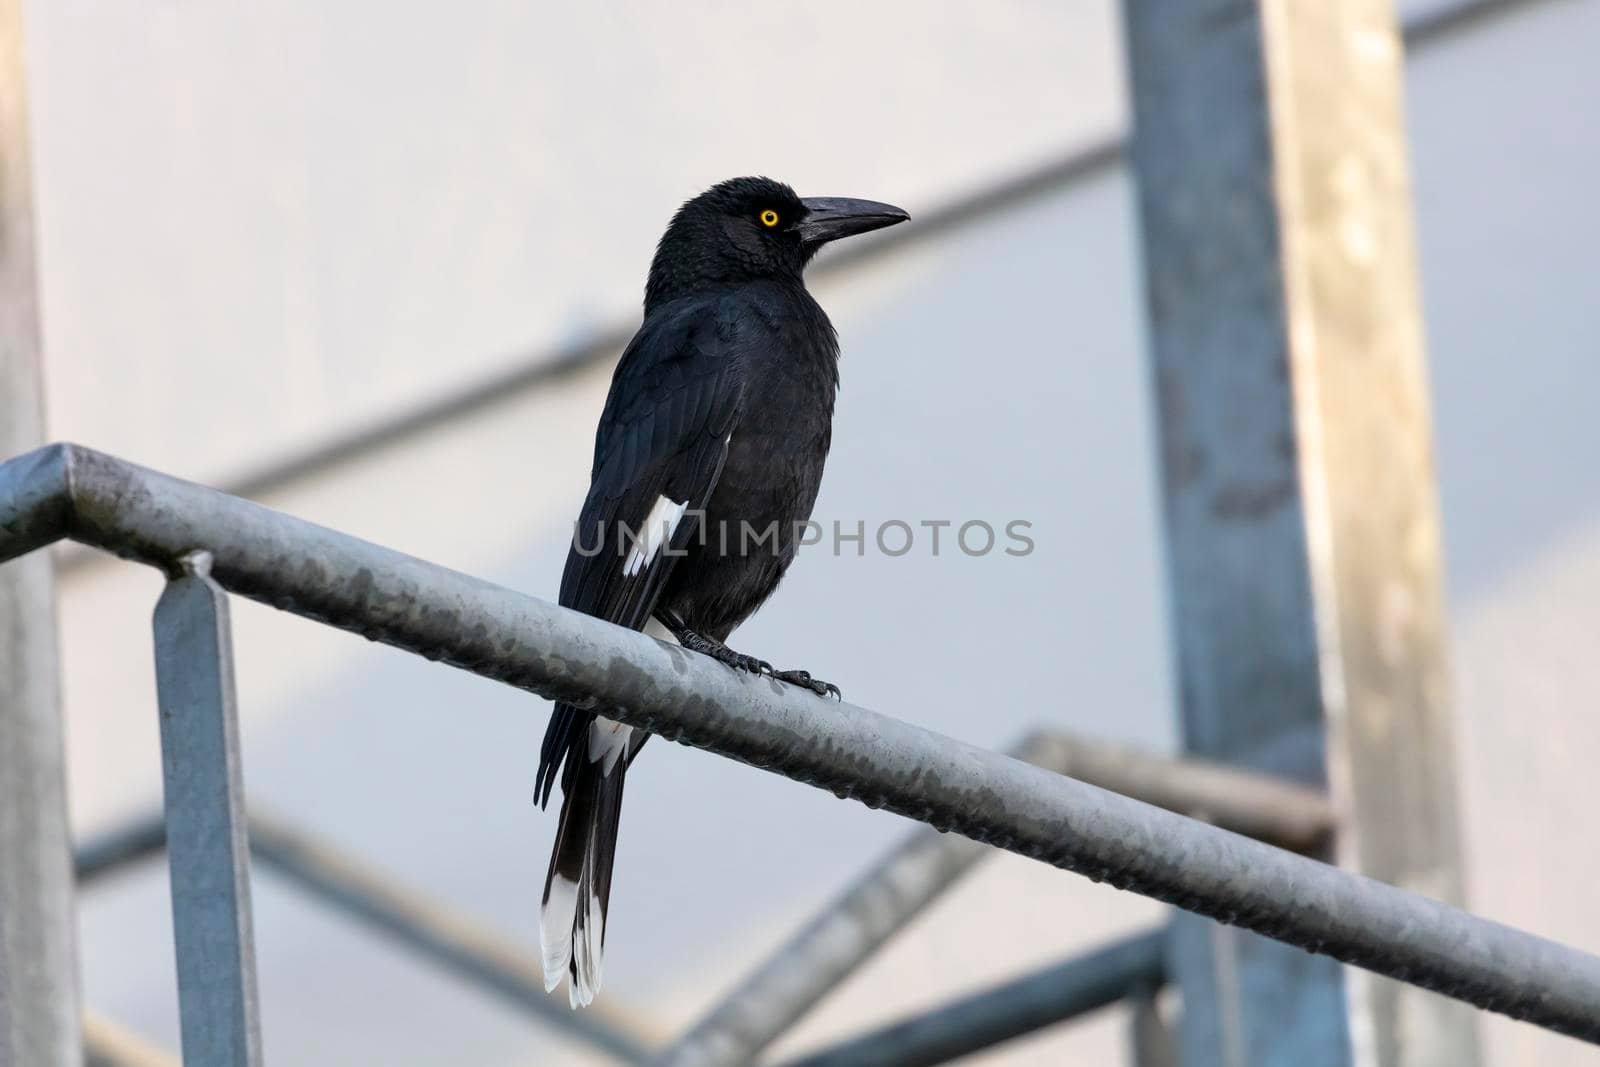 A Pied Currawong bird standing on a steel fence in Australia by WittkePhotos